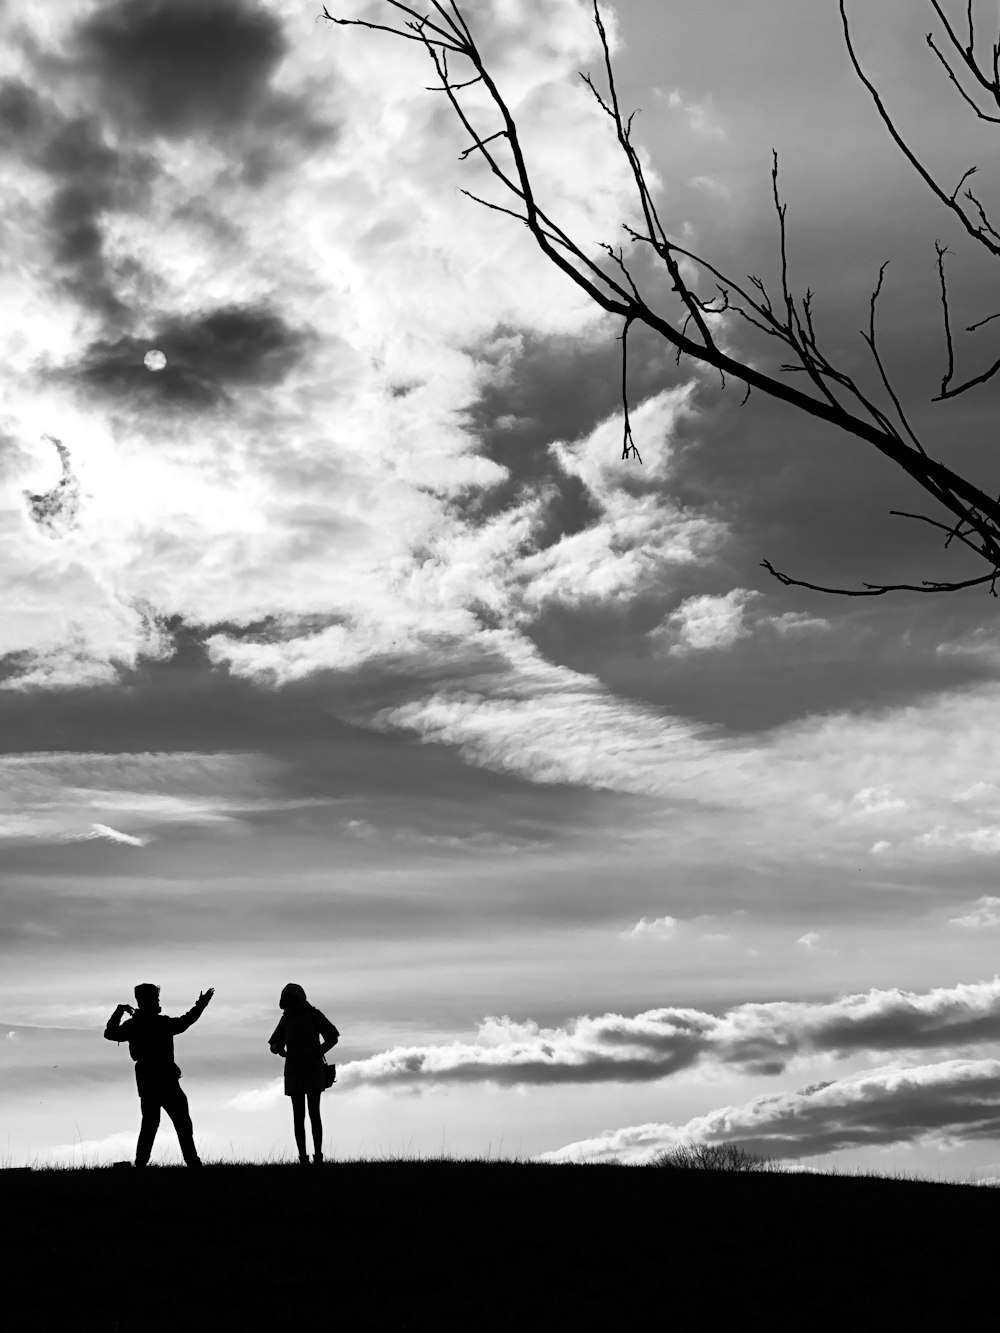 silhouette of 2 person standing on tree branch under cloudy sky during daytime